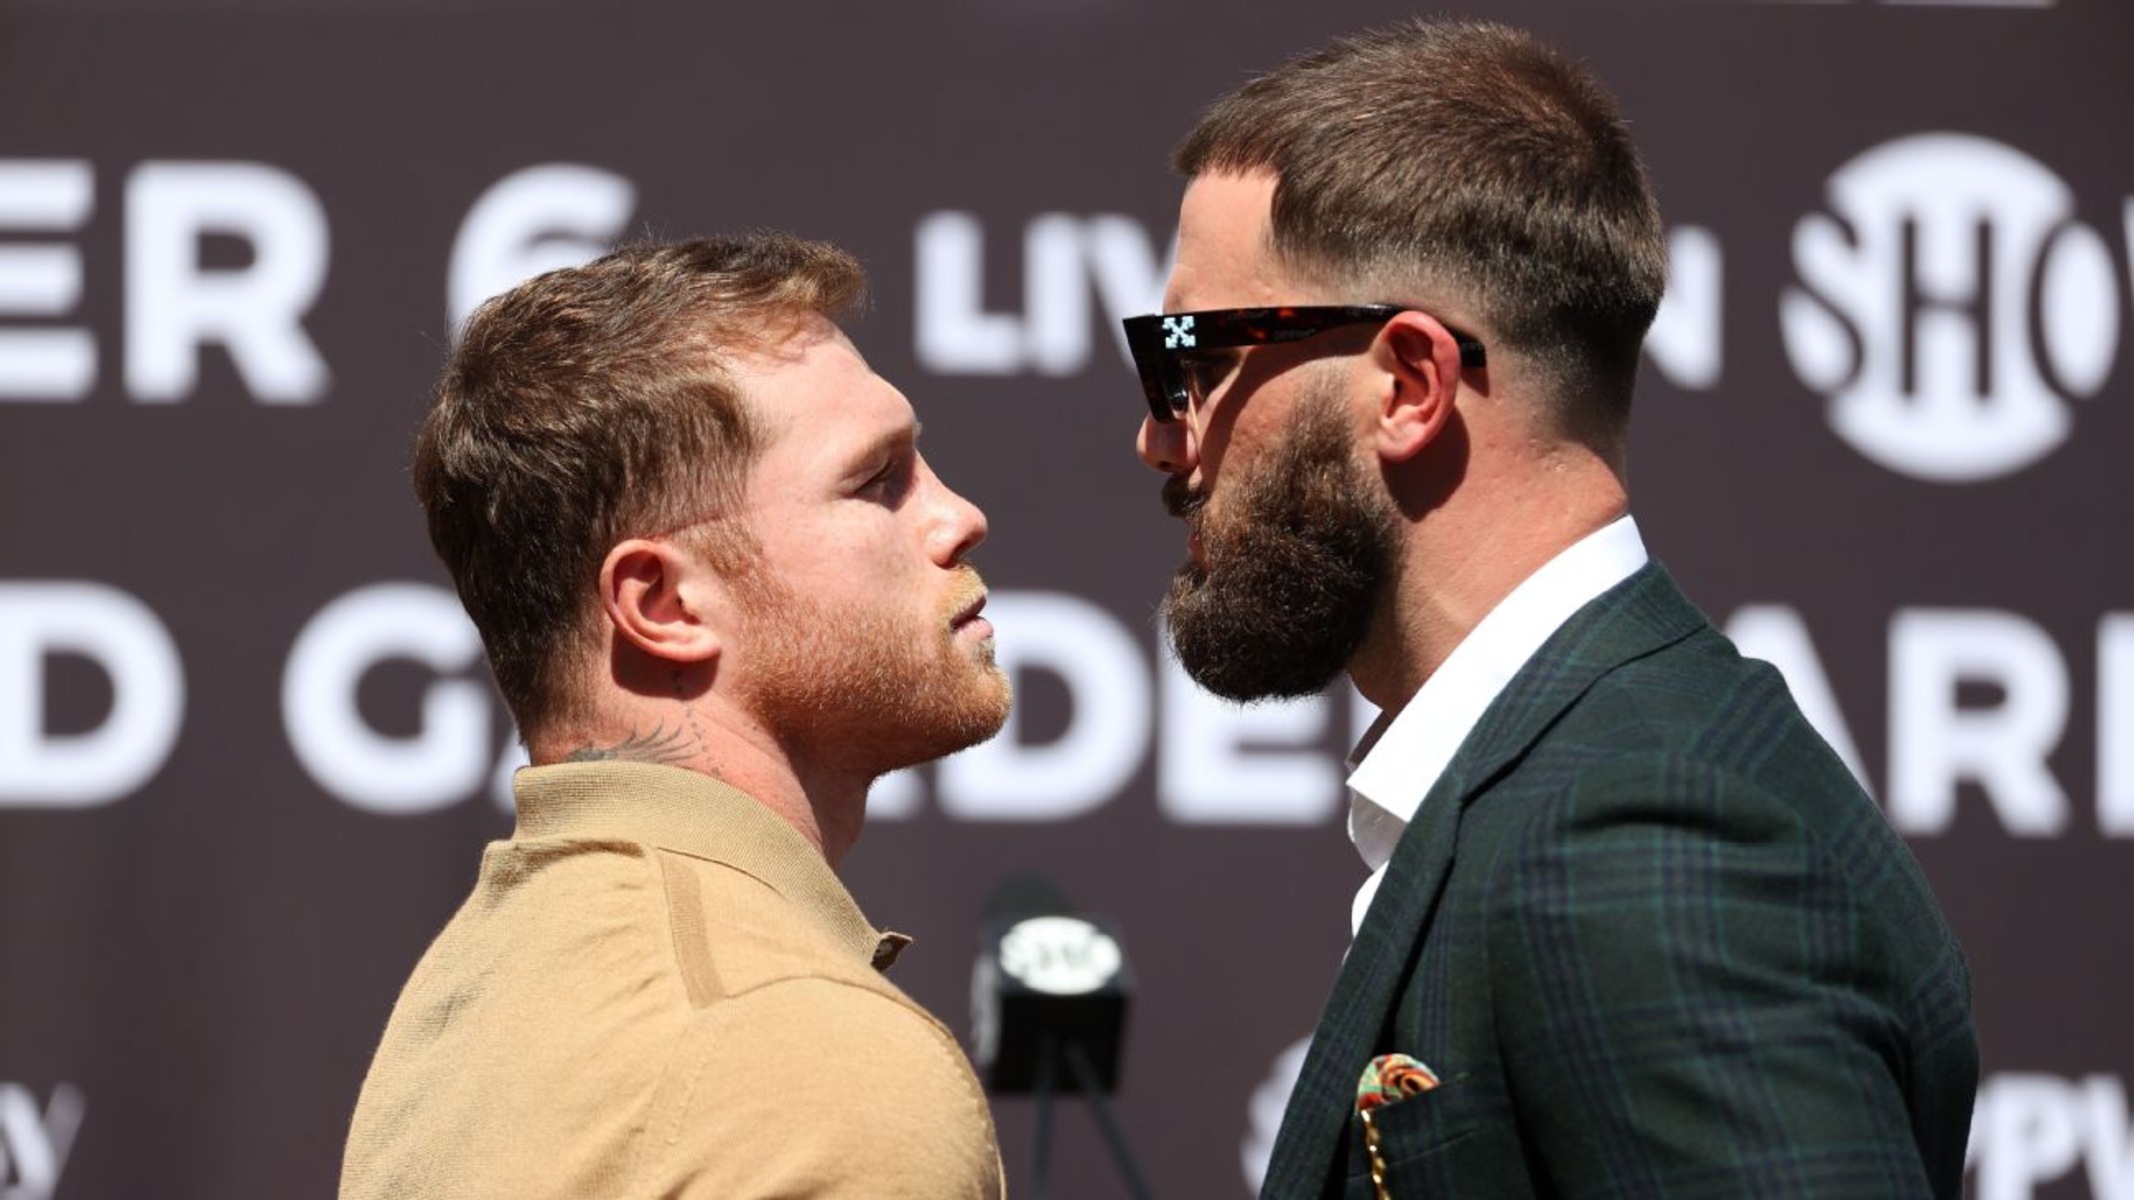 How To Watch The Canelo And Plant Fight